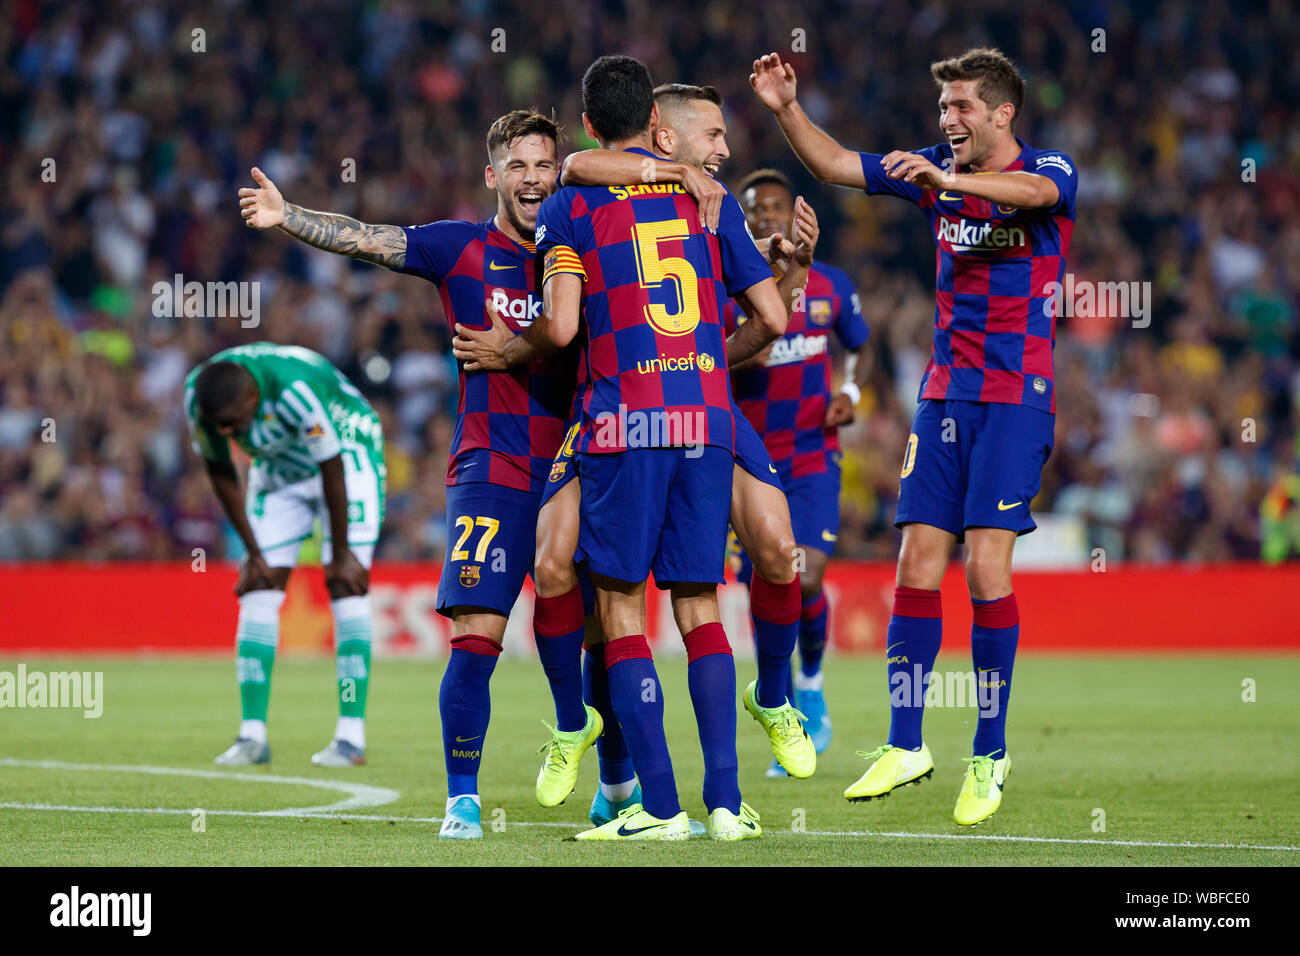 Barcelona, Spain. 25th Aug, 2019. BARCELONA, SPAIN - AUGUST 25: Jordi Alba of FC Barcelona celebrates with Sergio Busquets, Carles Perez and Sergi Roberto after scoring his team's fourth goal during the Liga match between FC Barcelona and Real Betis at Camp Nou on August 25, 2019 in Barcelona, Spain. (Photo by David Ramirez/Pacific Press) Credit: Pacific Press Agency/Alamy Live News Stock Photo